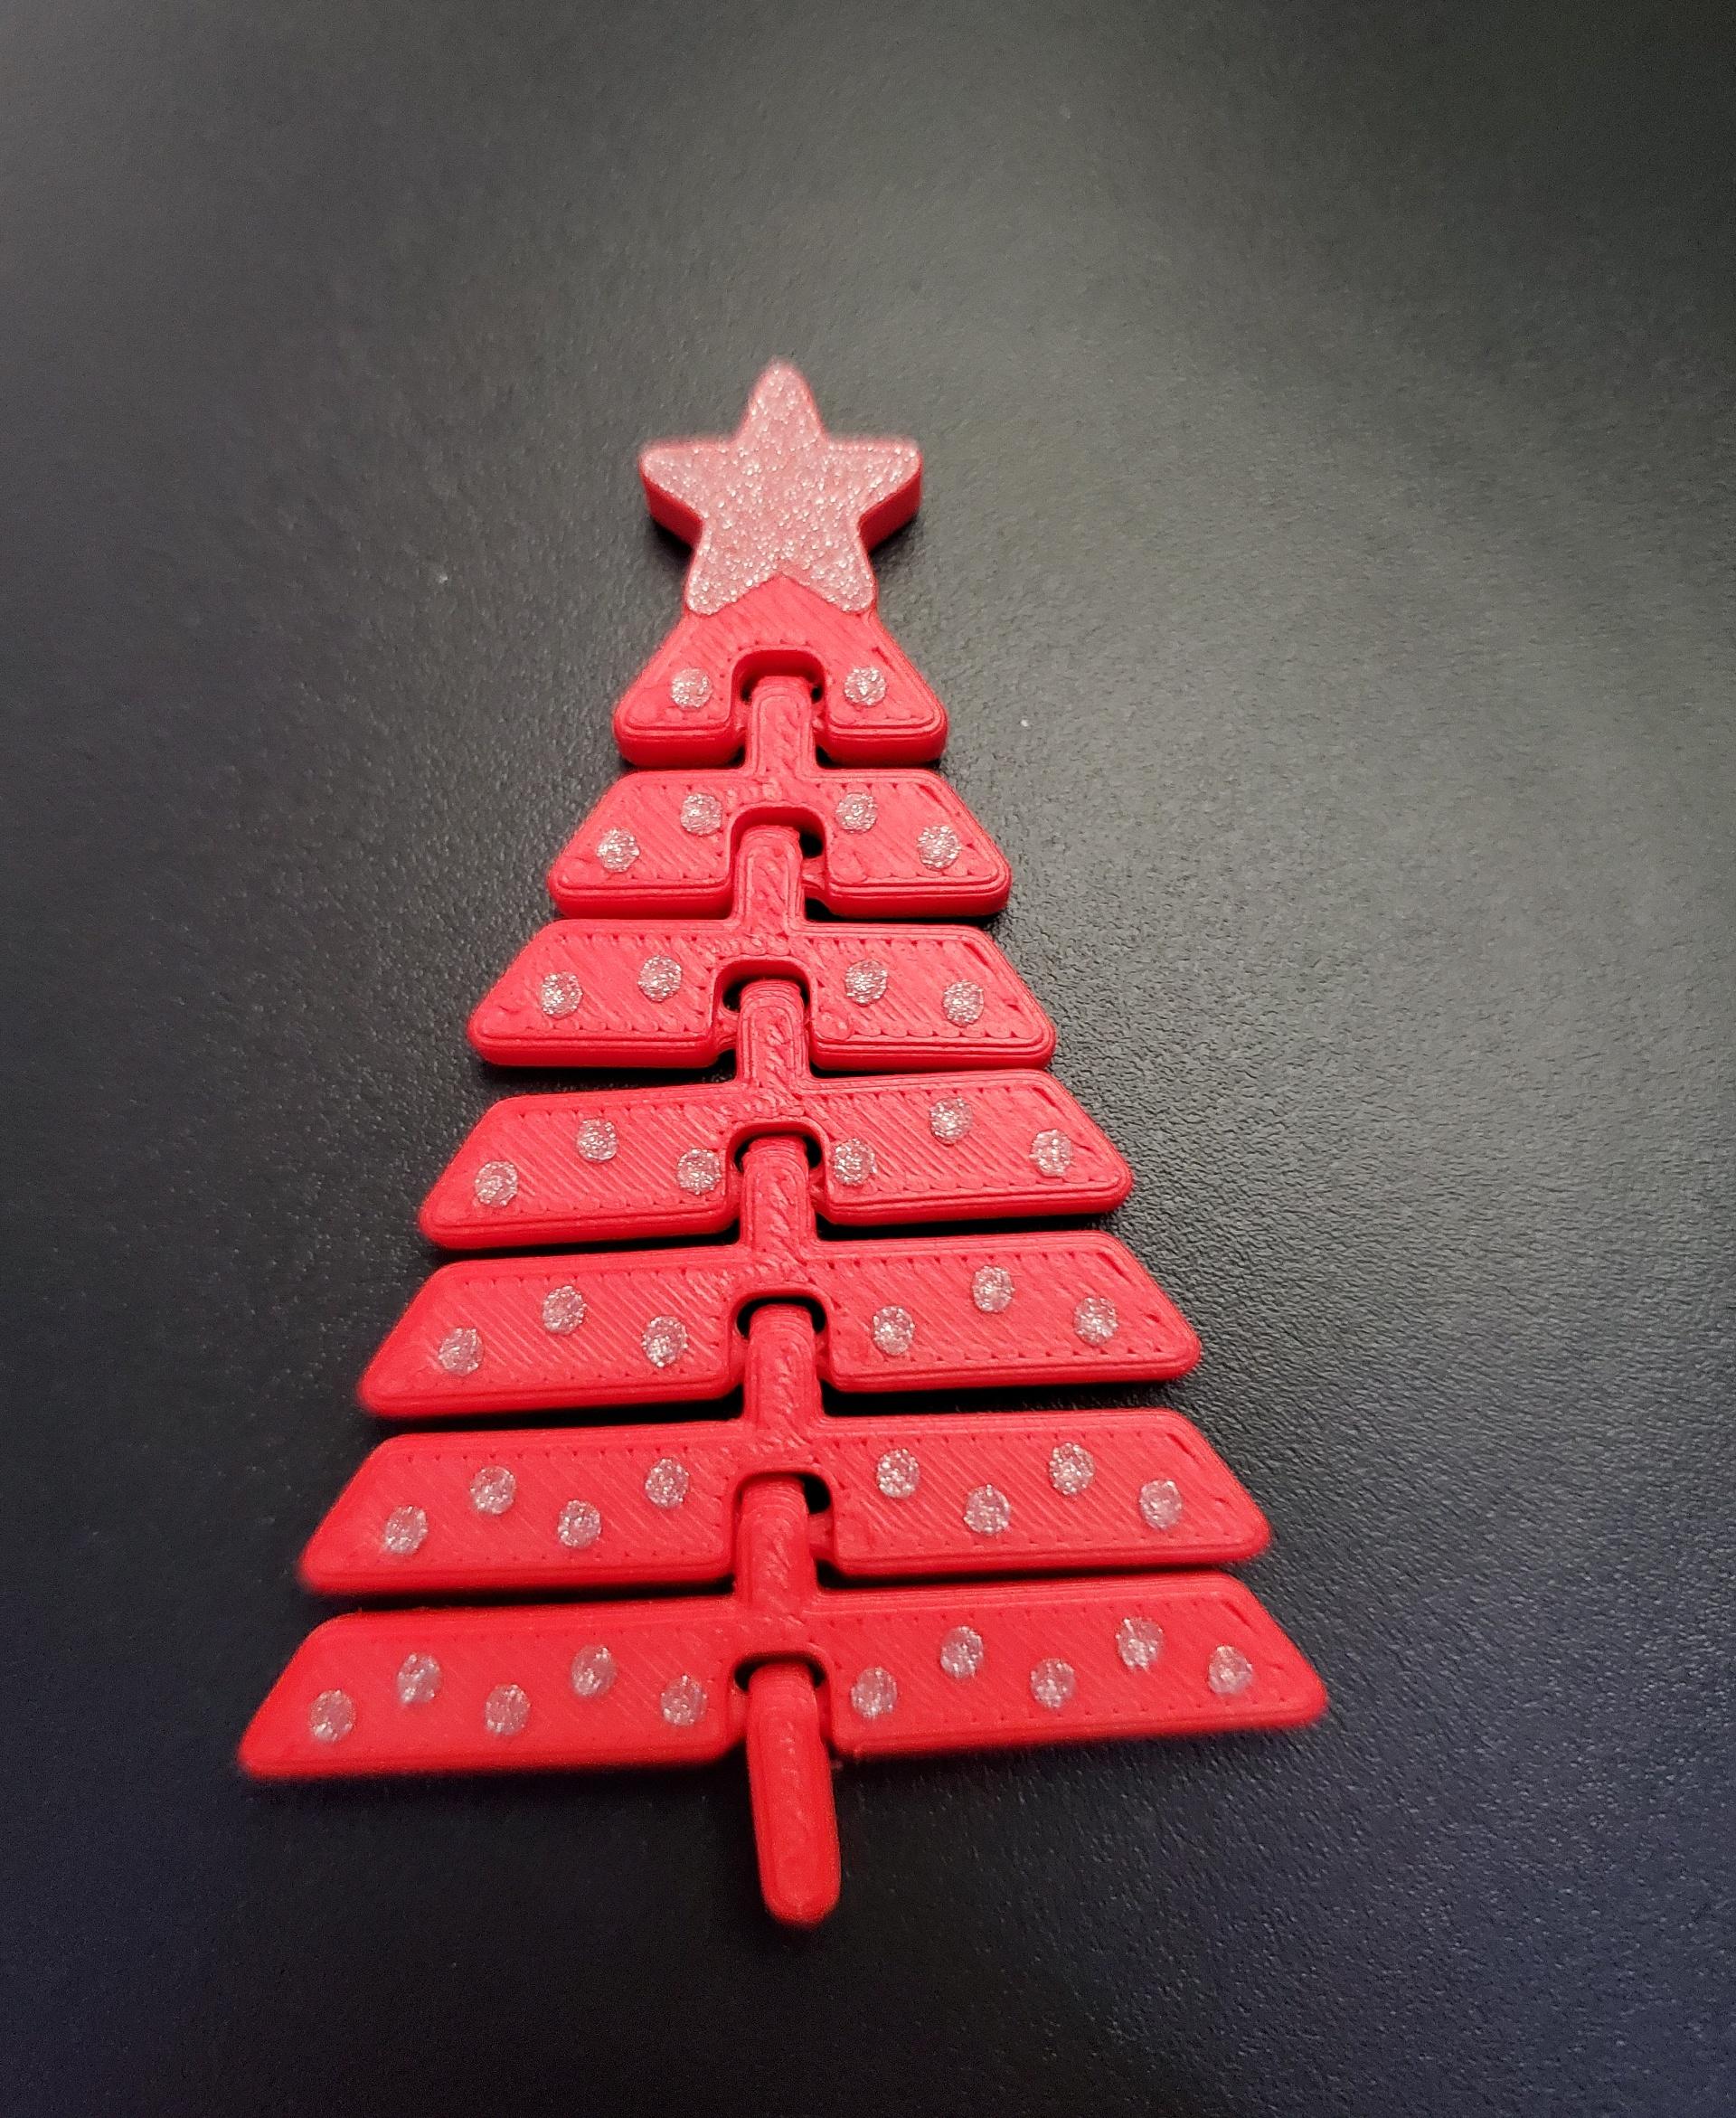 Articulated Christmas Tree with Star and Ornaments - Print in place fidget toys - 3mf - polyterra lava red - 3d model